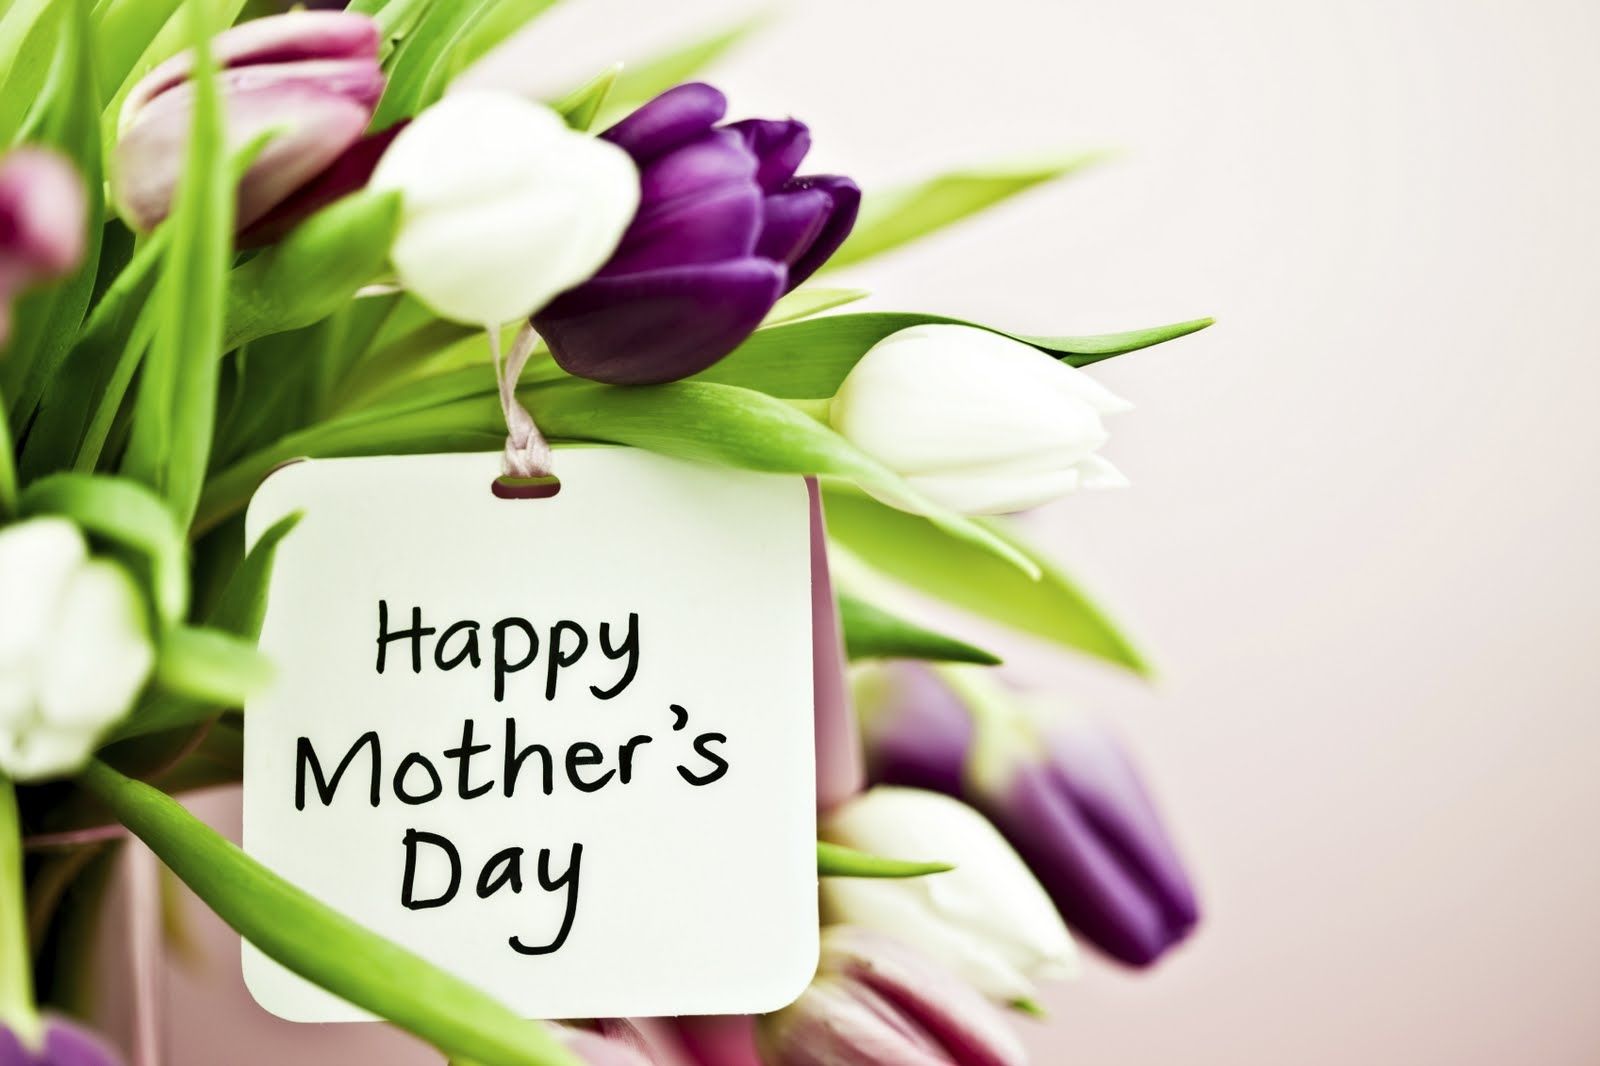 Free Christian Wallpaper: Happy Mothers Day Wallpaper